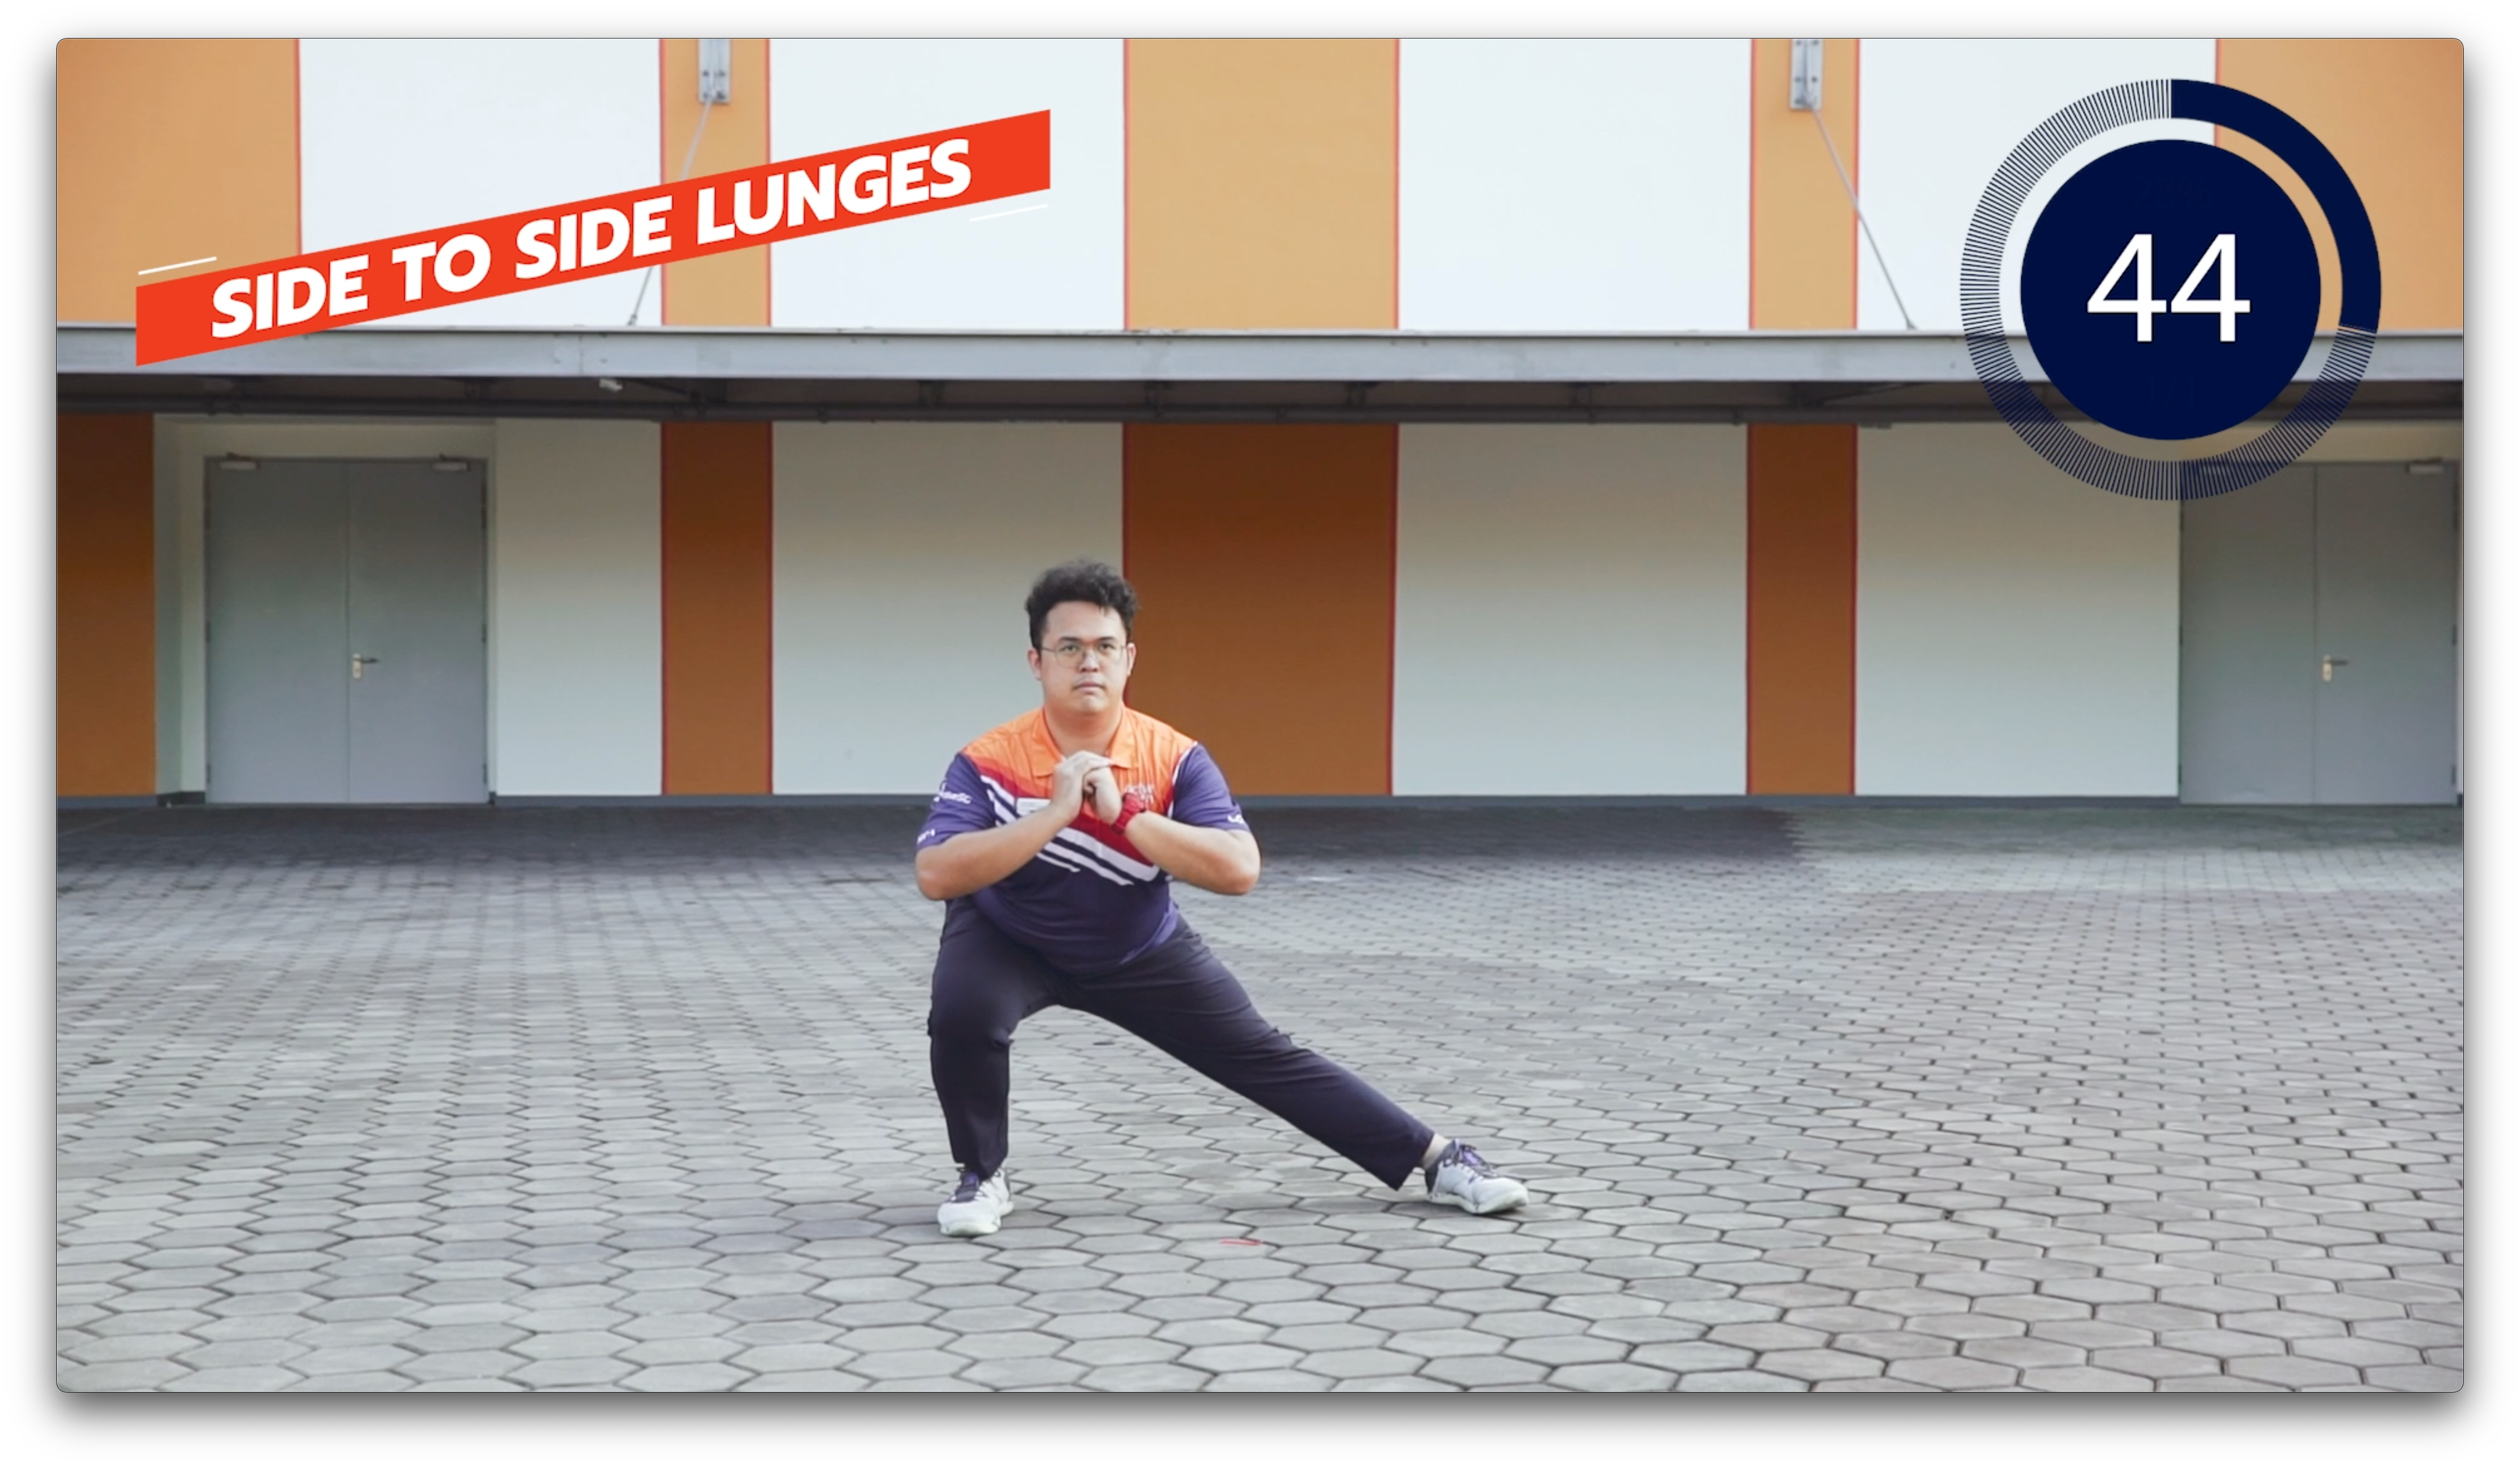 Side to Side Lunges